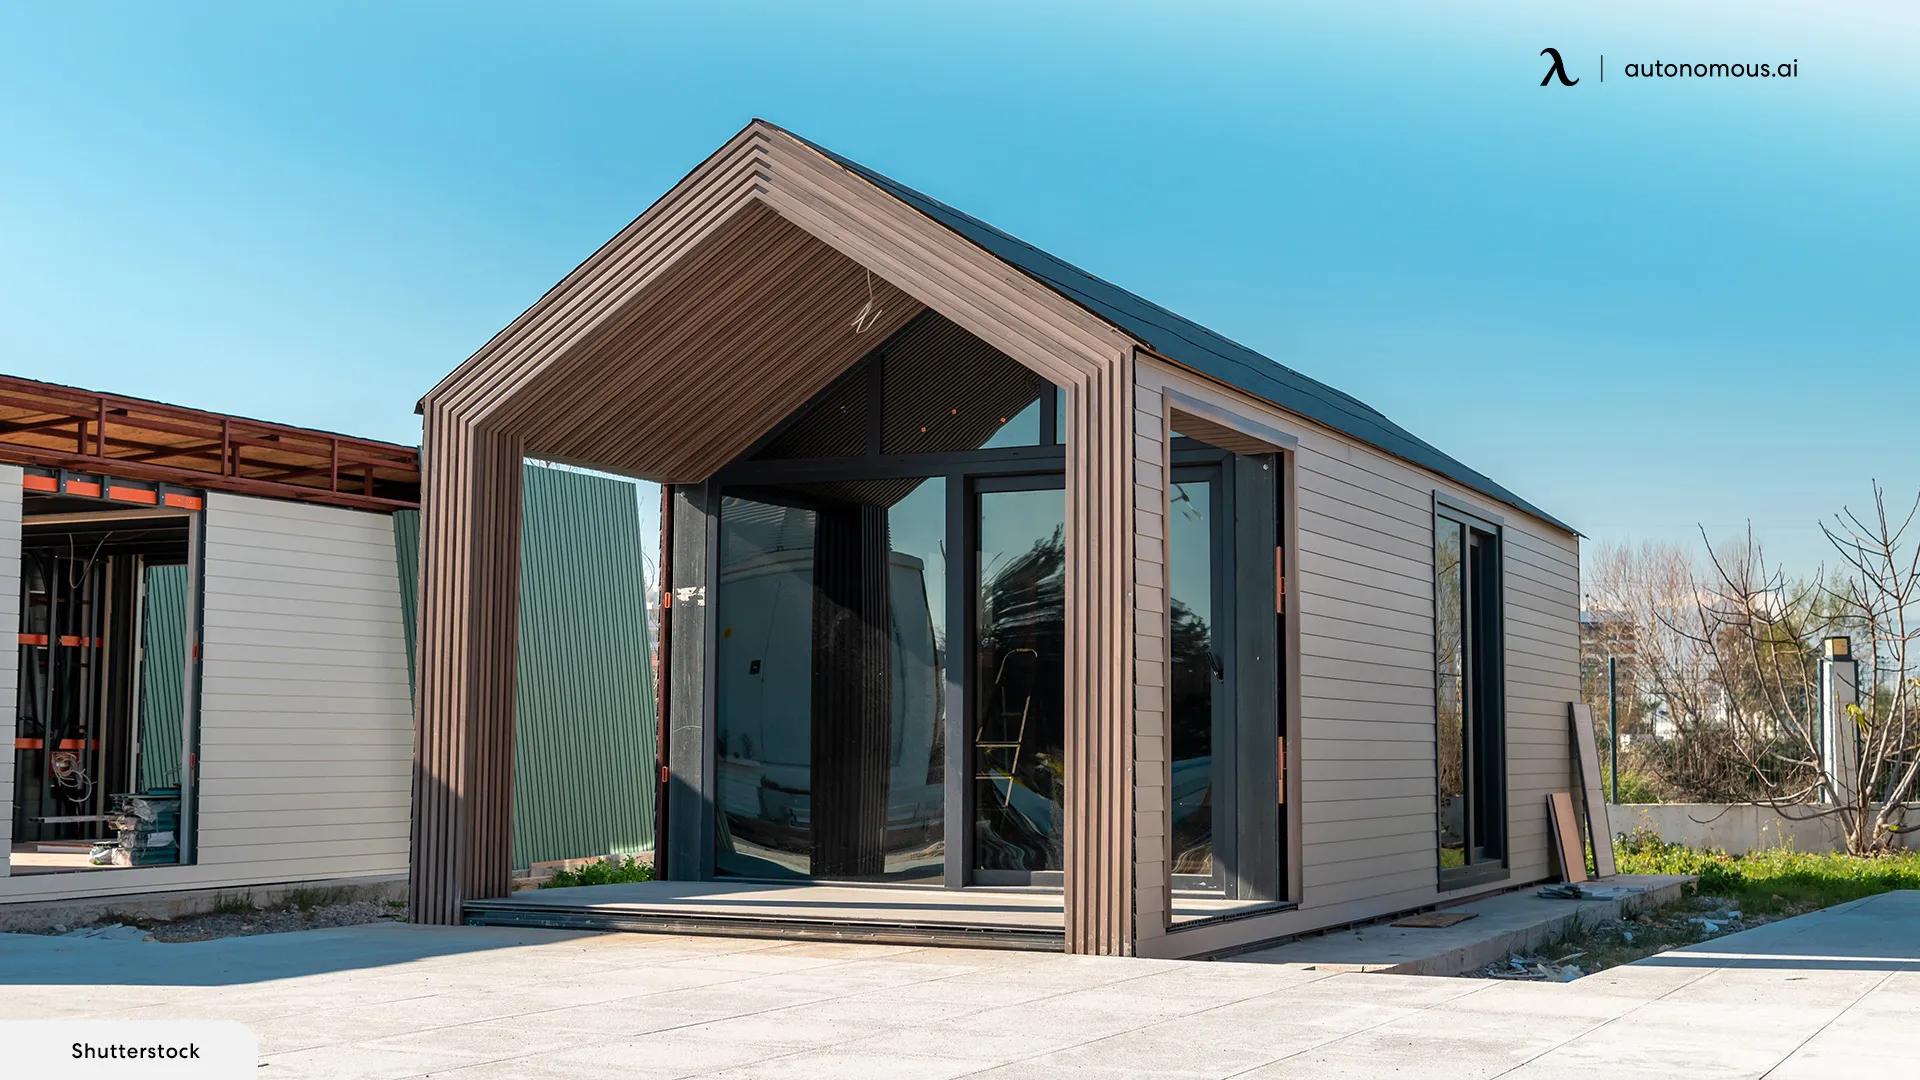 What Is the Best Kind of Prefabricated Home?